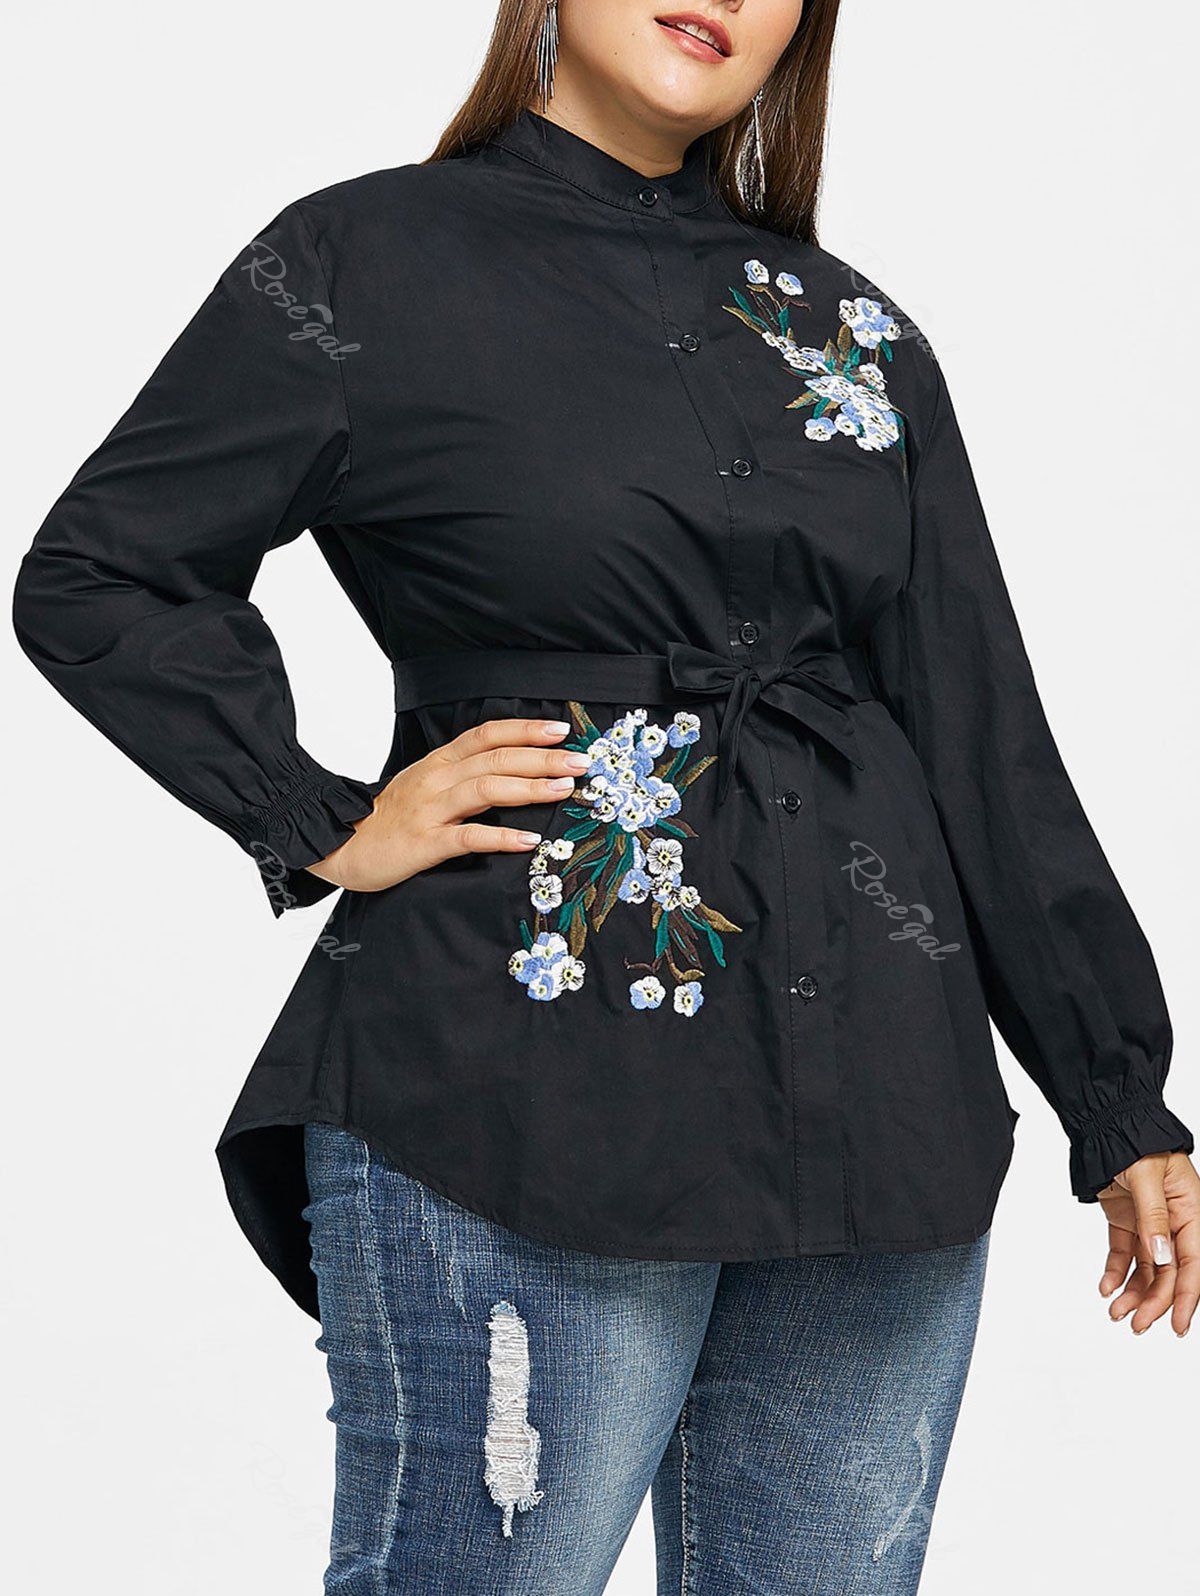 [36% OFF] Plus Size Elastic Cuffs Floral Embroidery Shirt | Rosegal